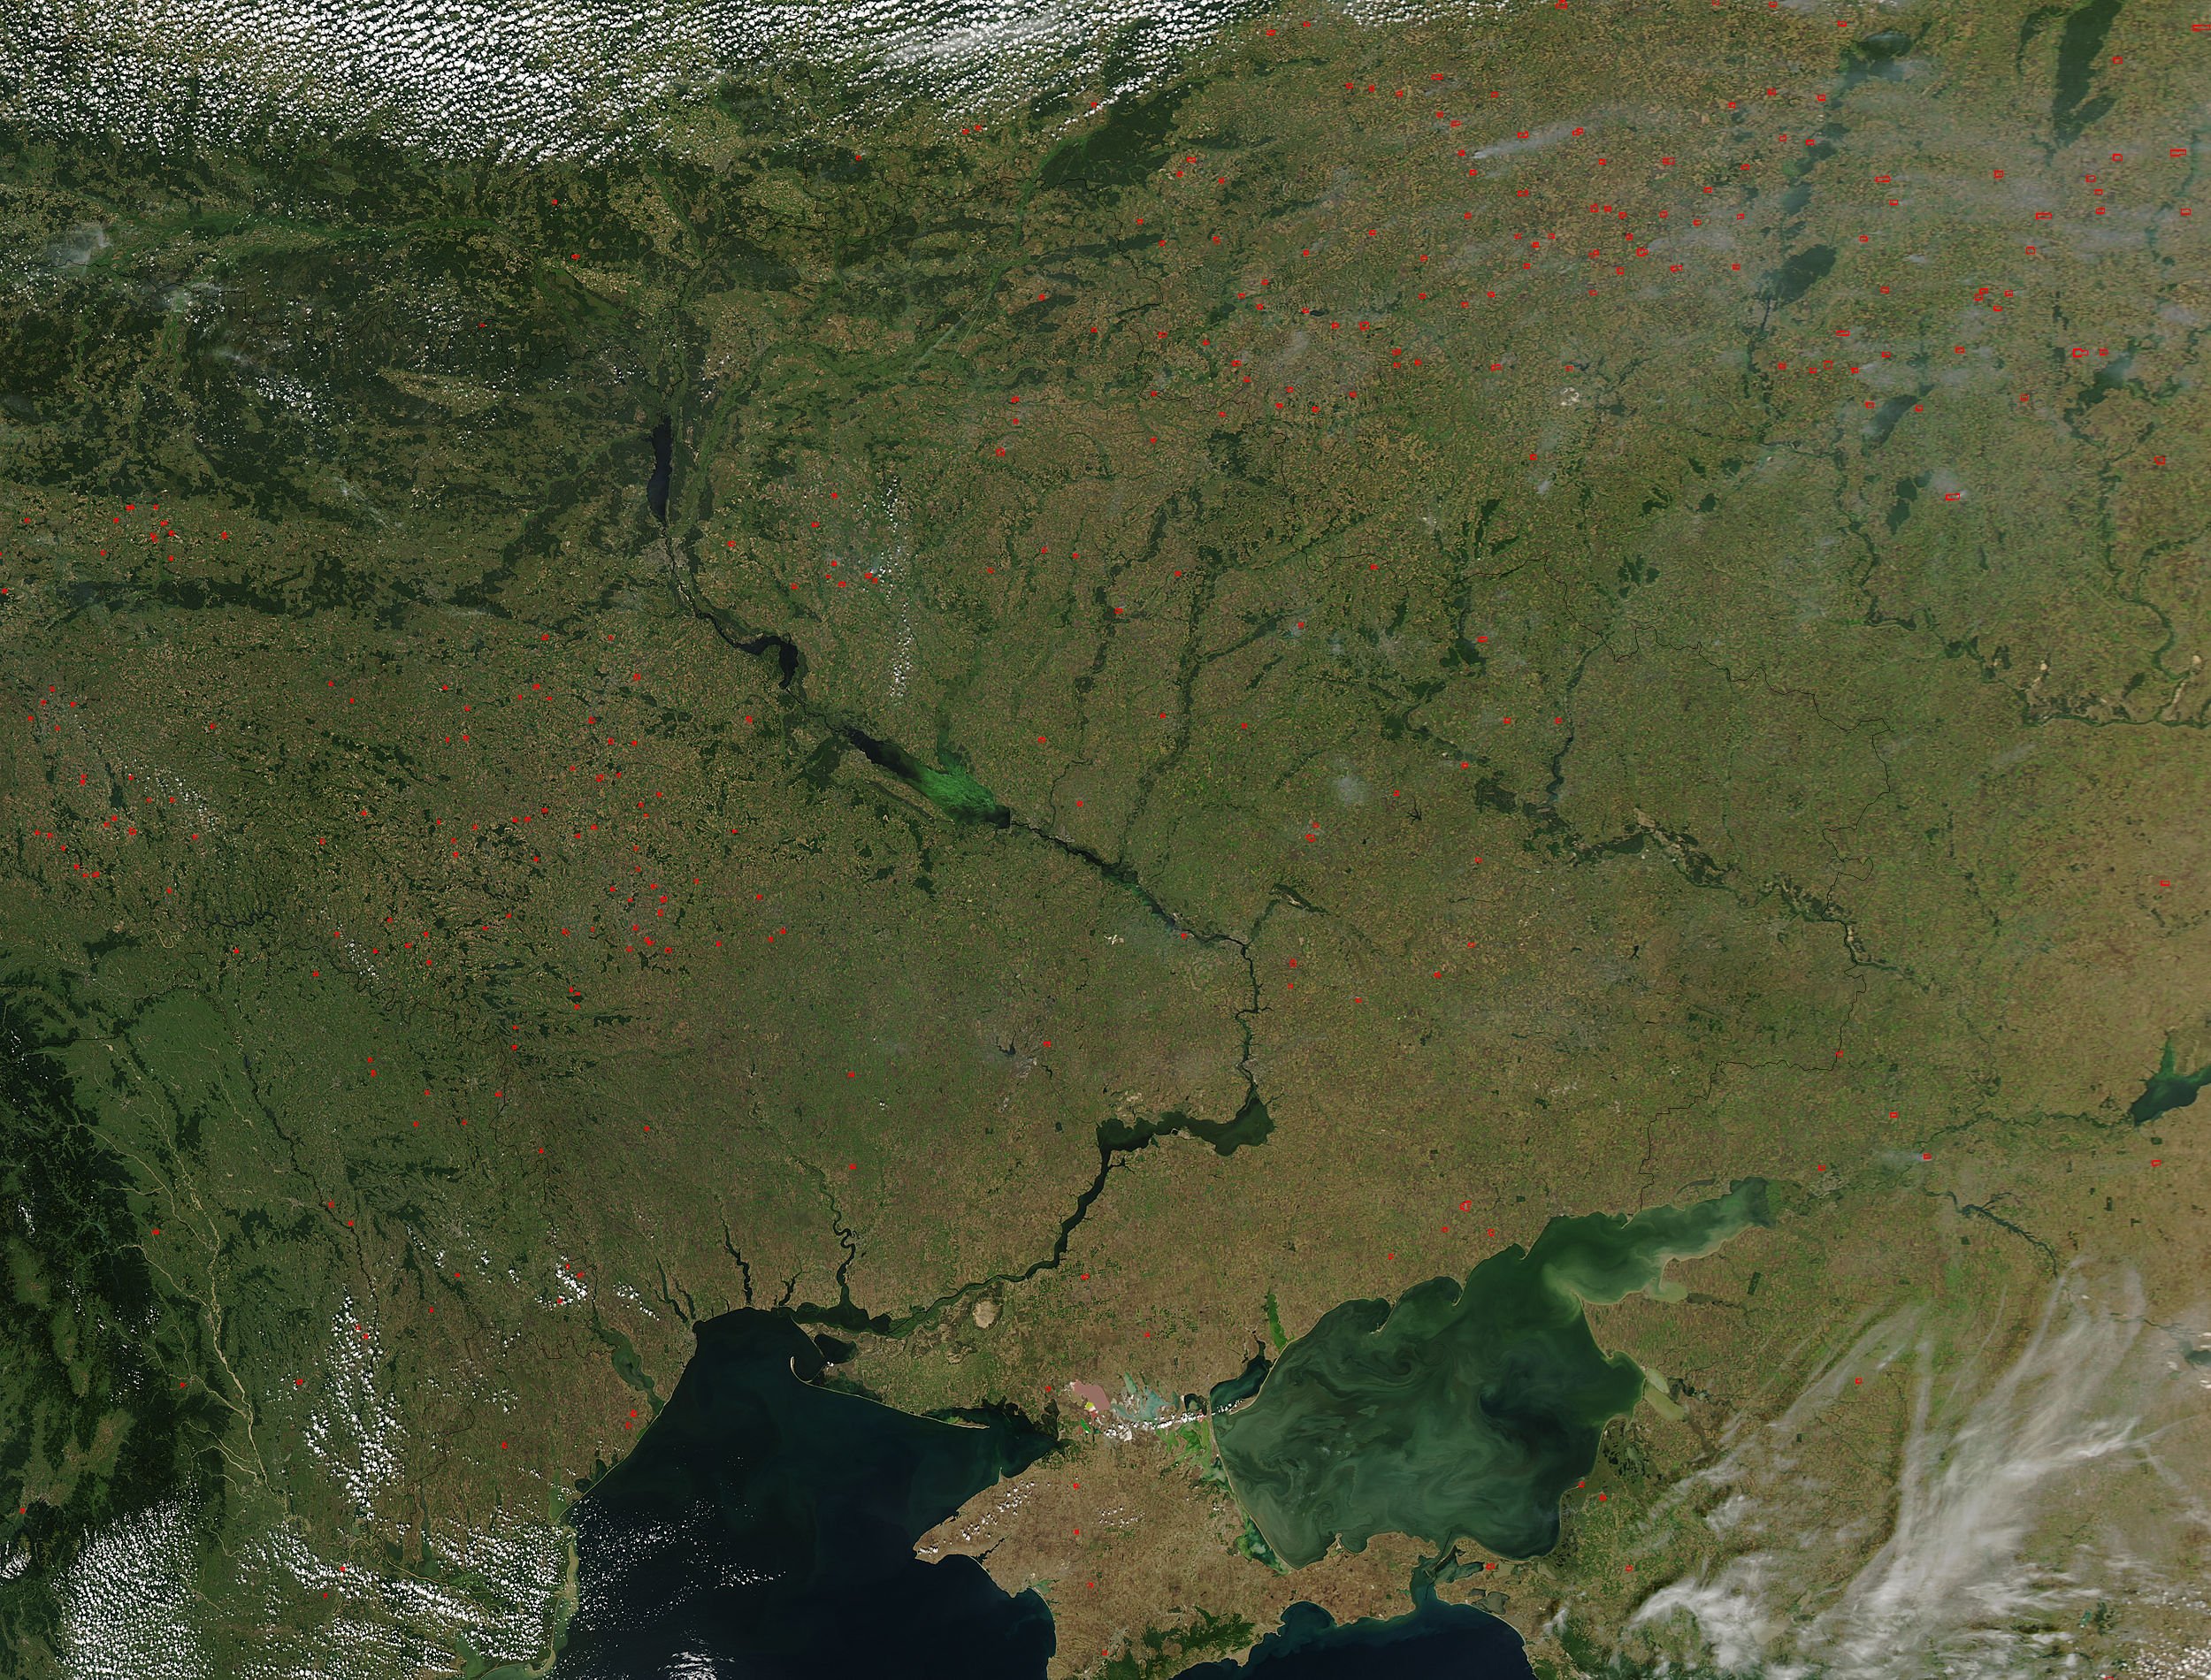 Grain breakthroughs are noticed from space: Ukraine has successfully harvest during the war